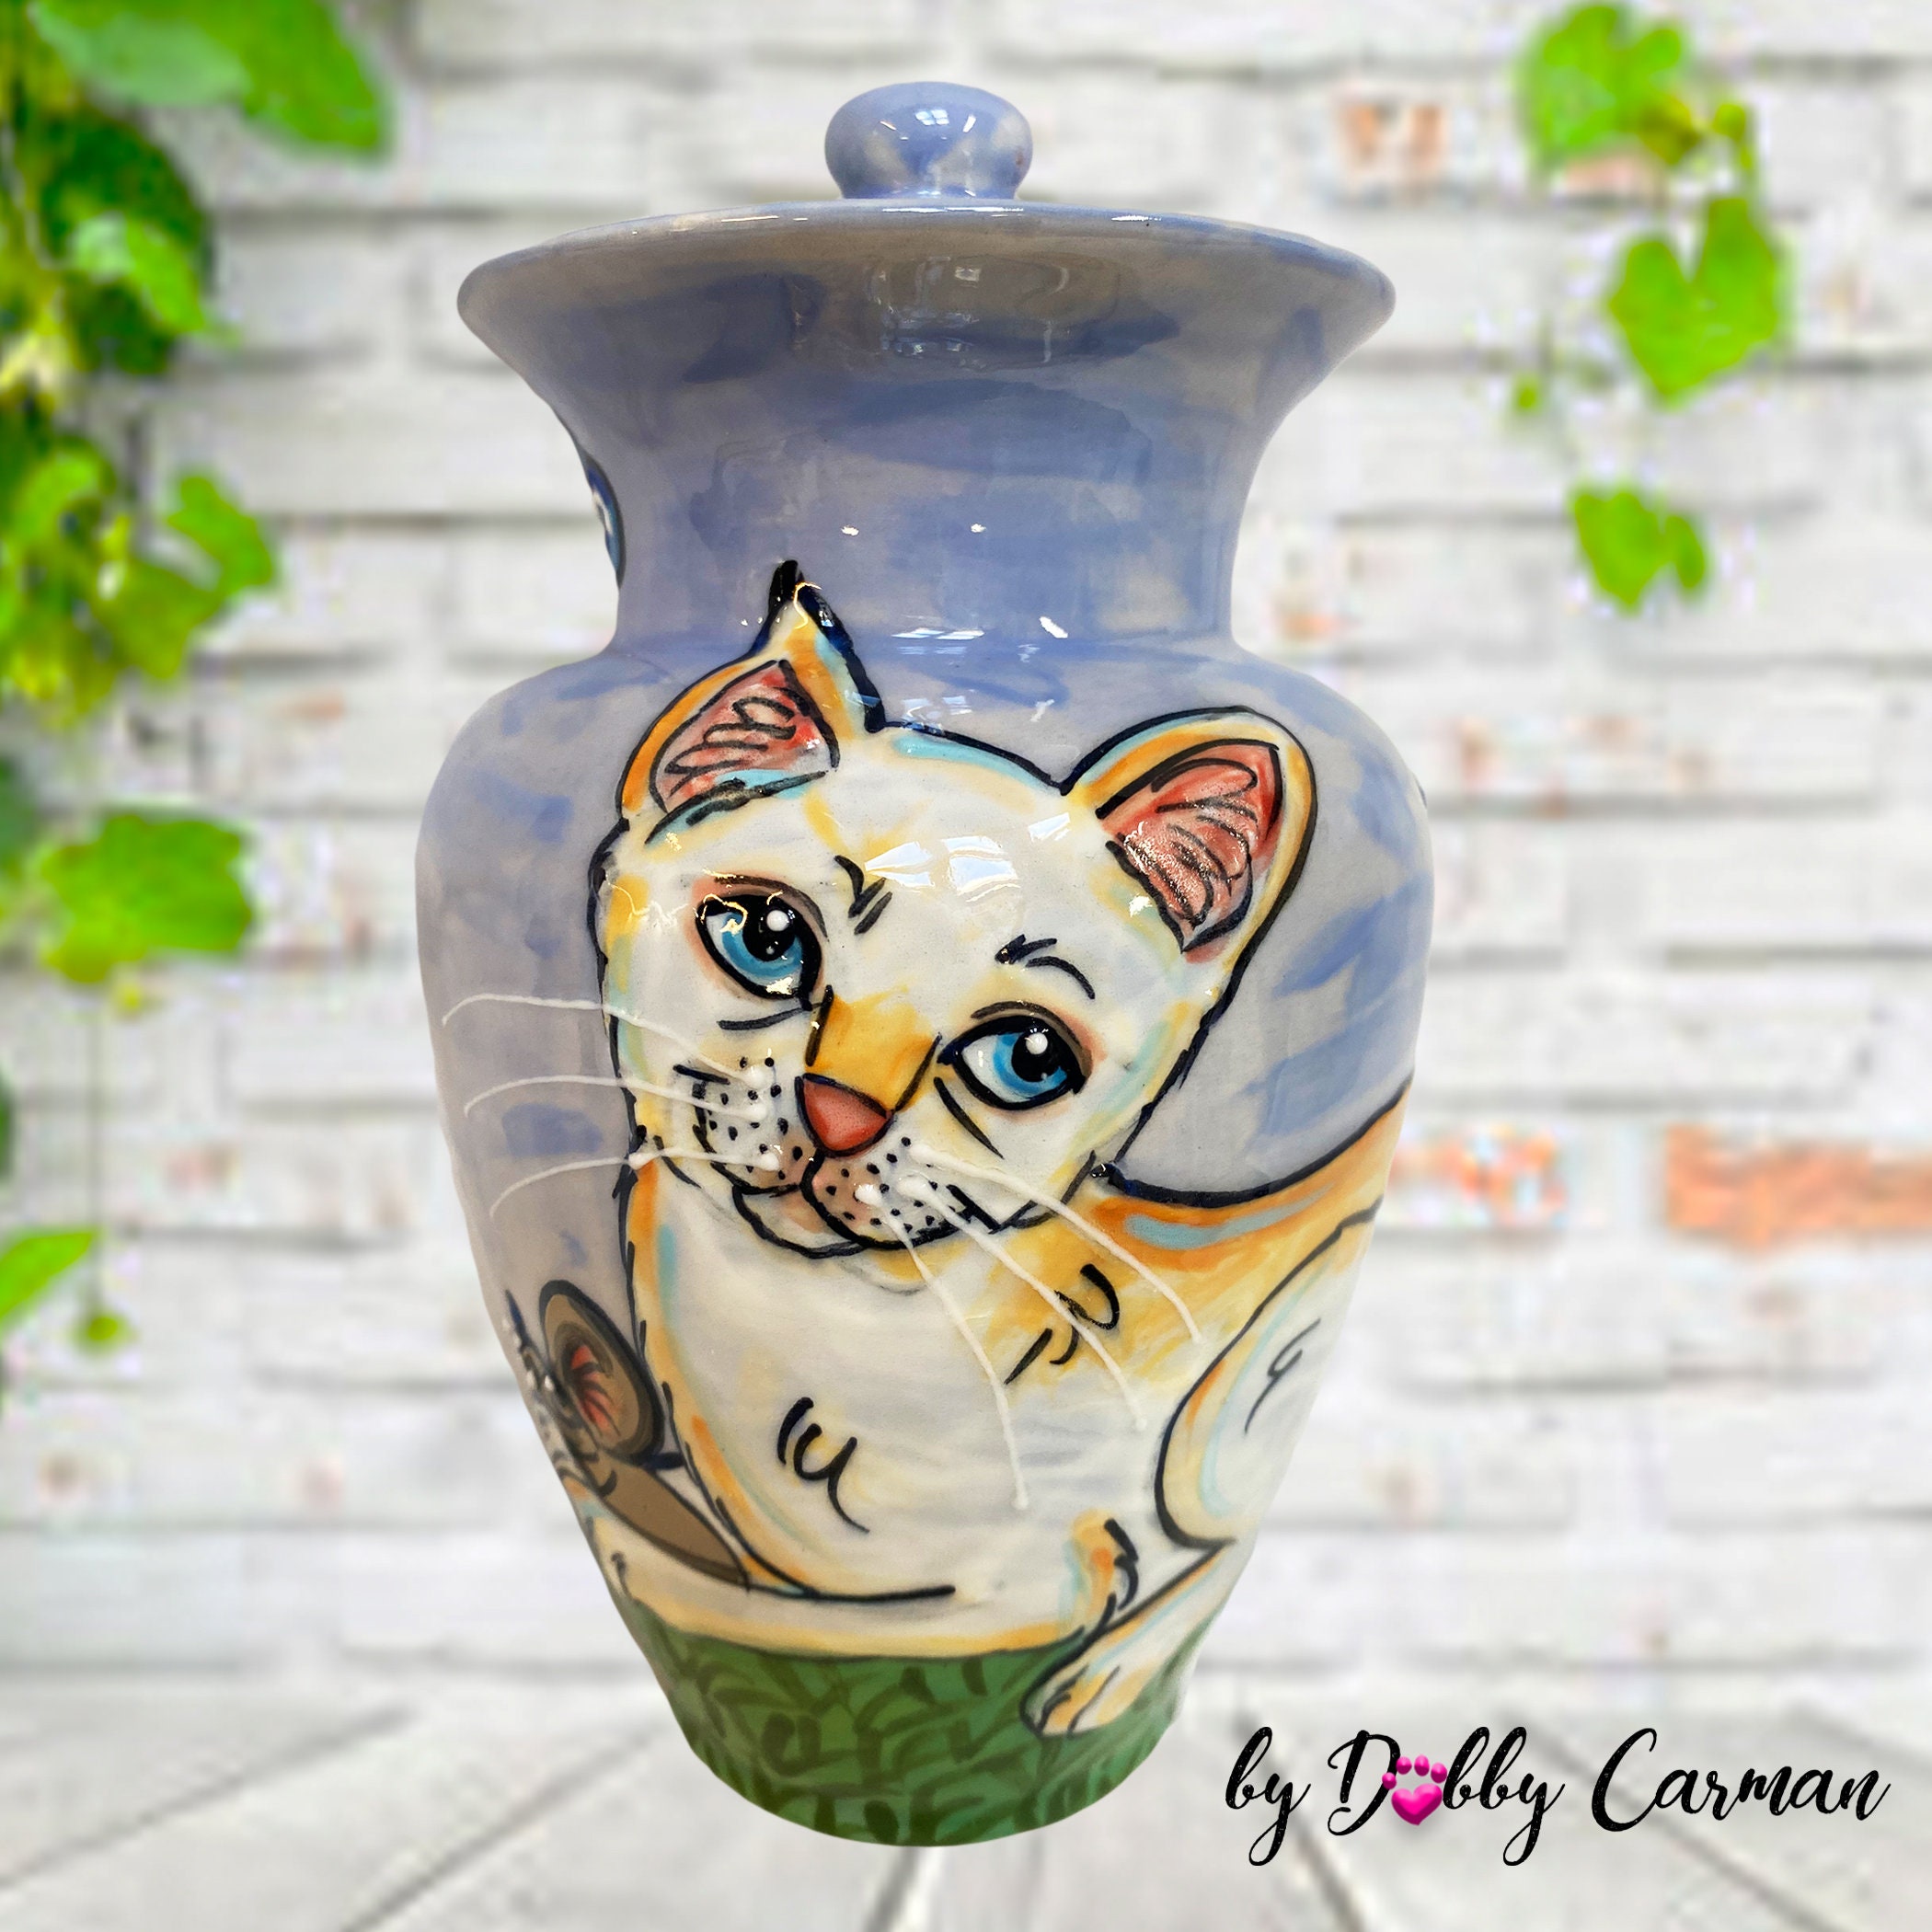 Hand Painted Small Cat Burial Urn - Customized Ceramic Resting Place with Kitty's Portrayal For Beloved Pet Ashes/Cremains. Memorial Keepsake